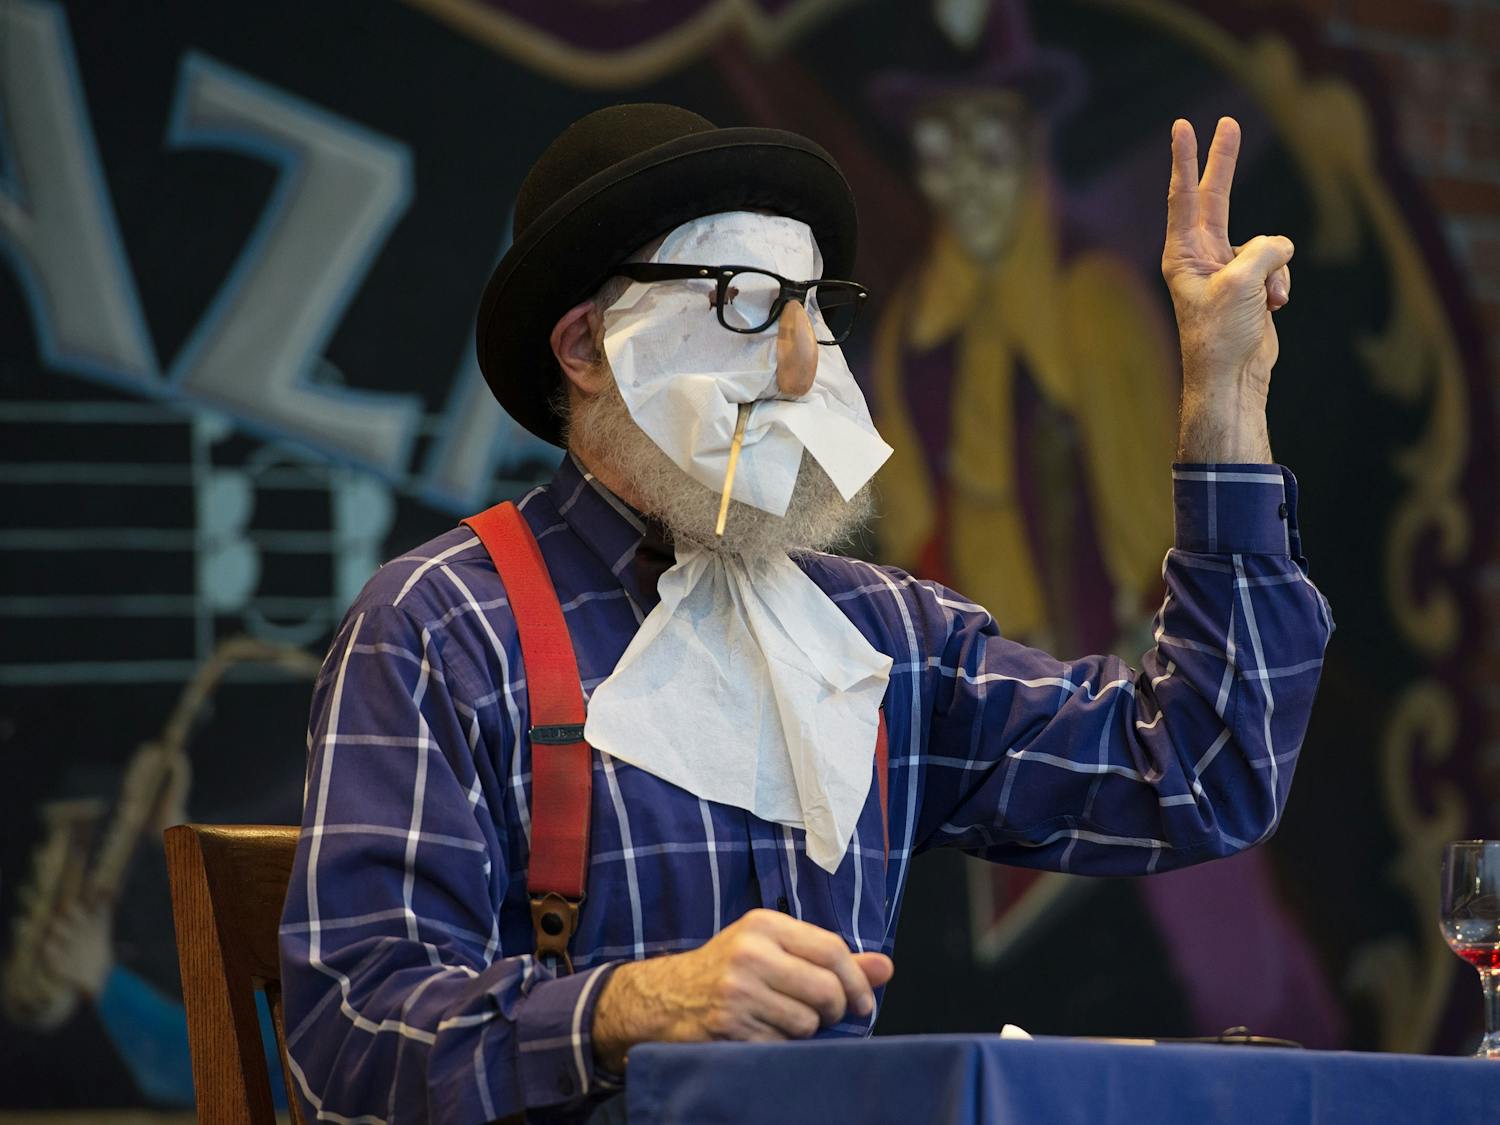 Clown and film star Avner Eisenberg, whose stage name is Avner the Eccentric, will be returning to perform at this year’s Jest Fest on Sunday.